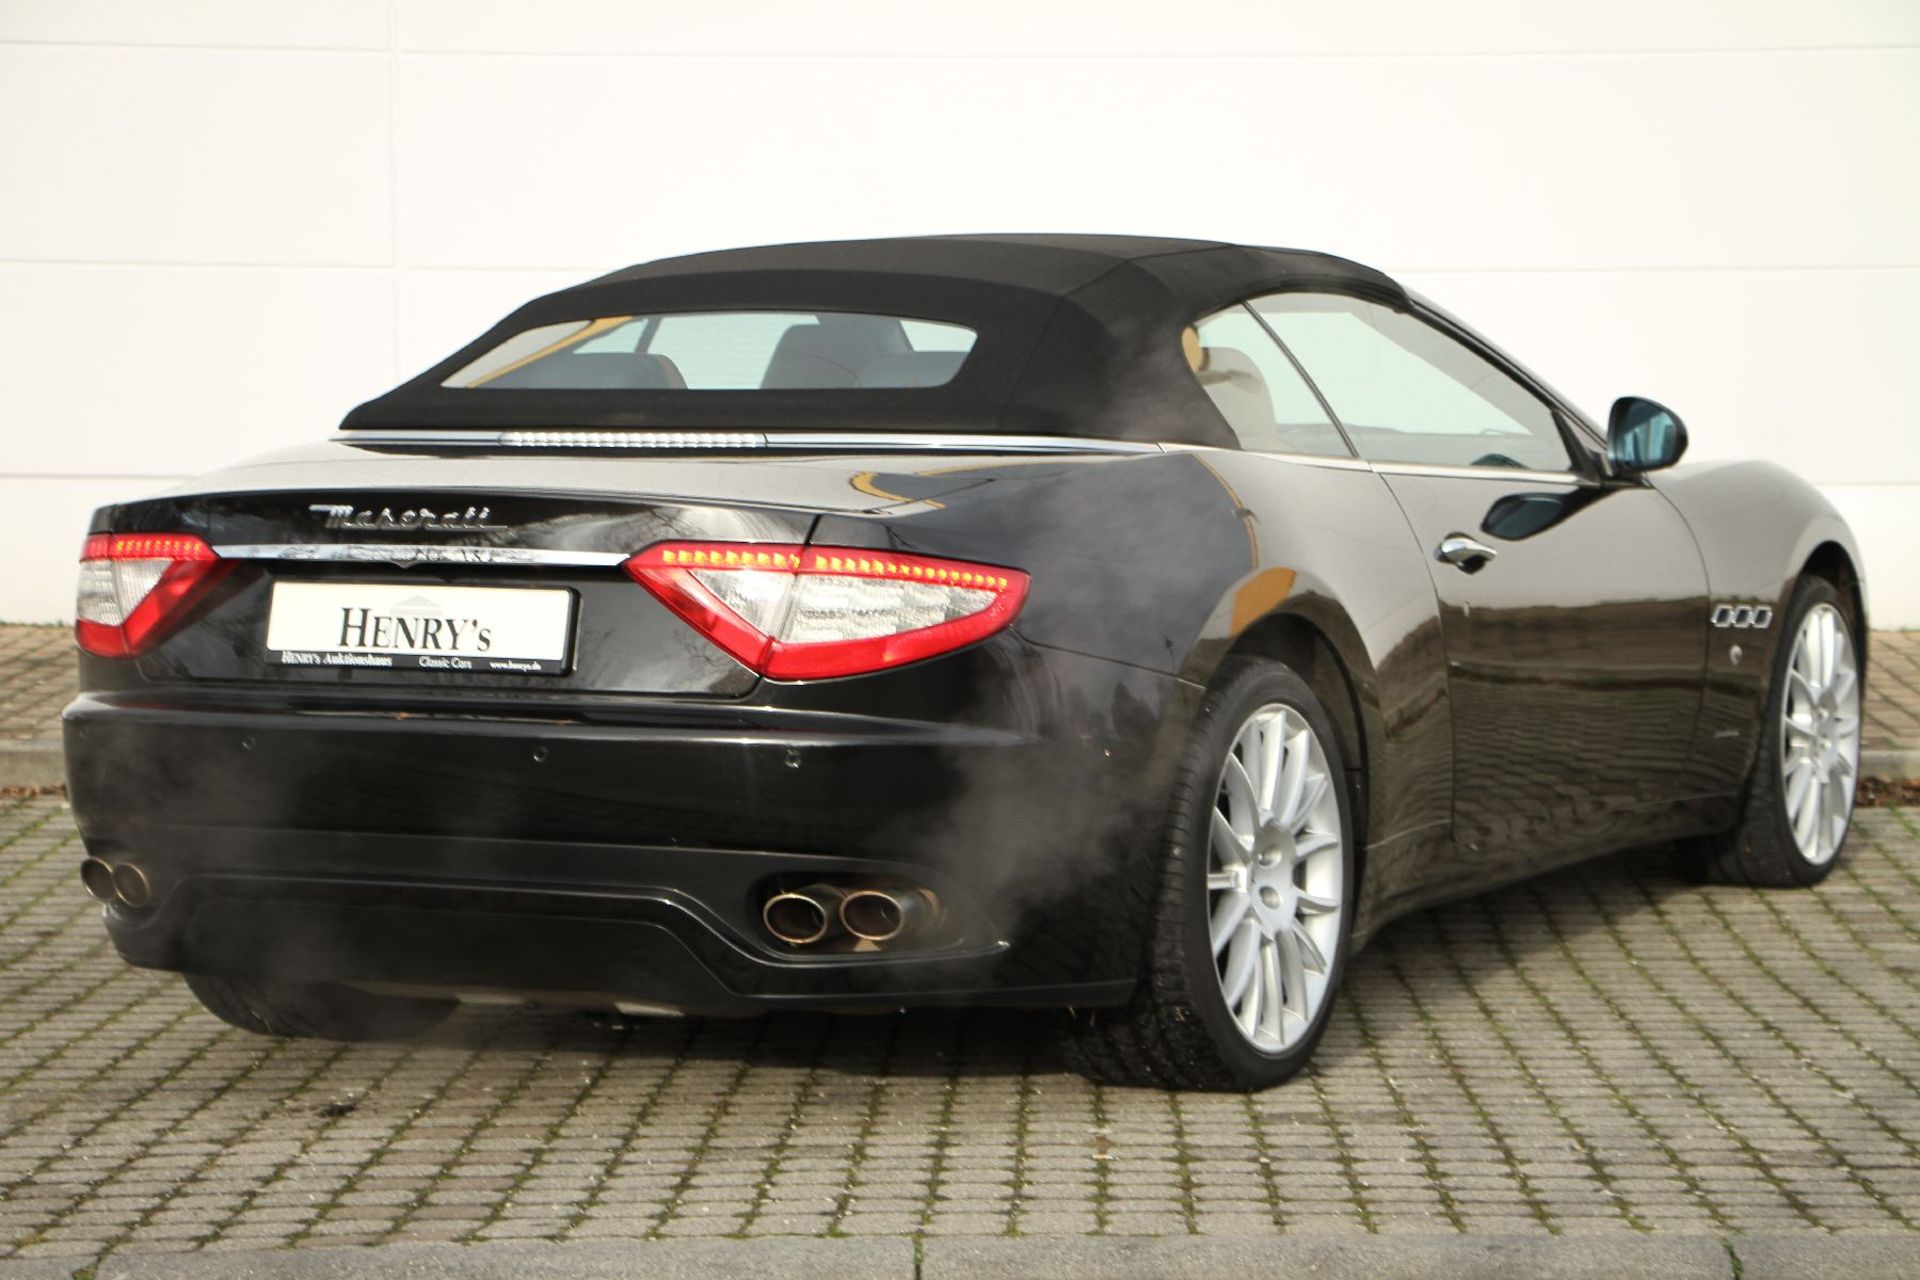 Maserati Grand Cabrio, Chassis Number: ZAMKM45B000052657, first registered 04/2010, two owners, - Bild 6 aus 15